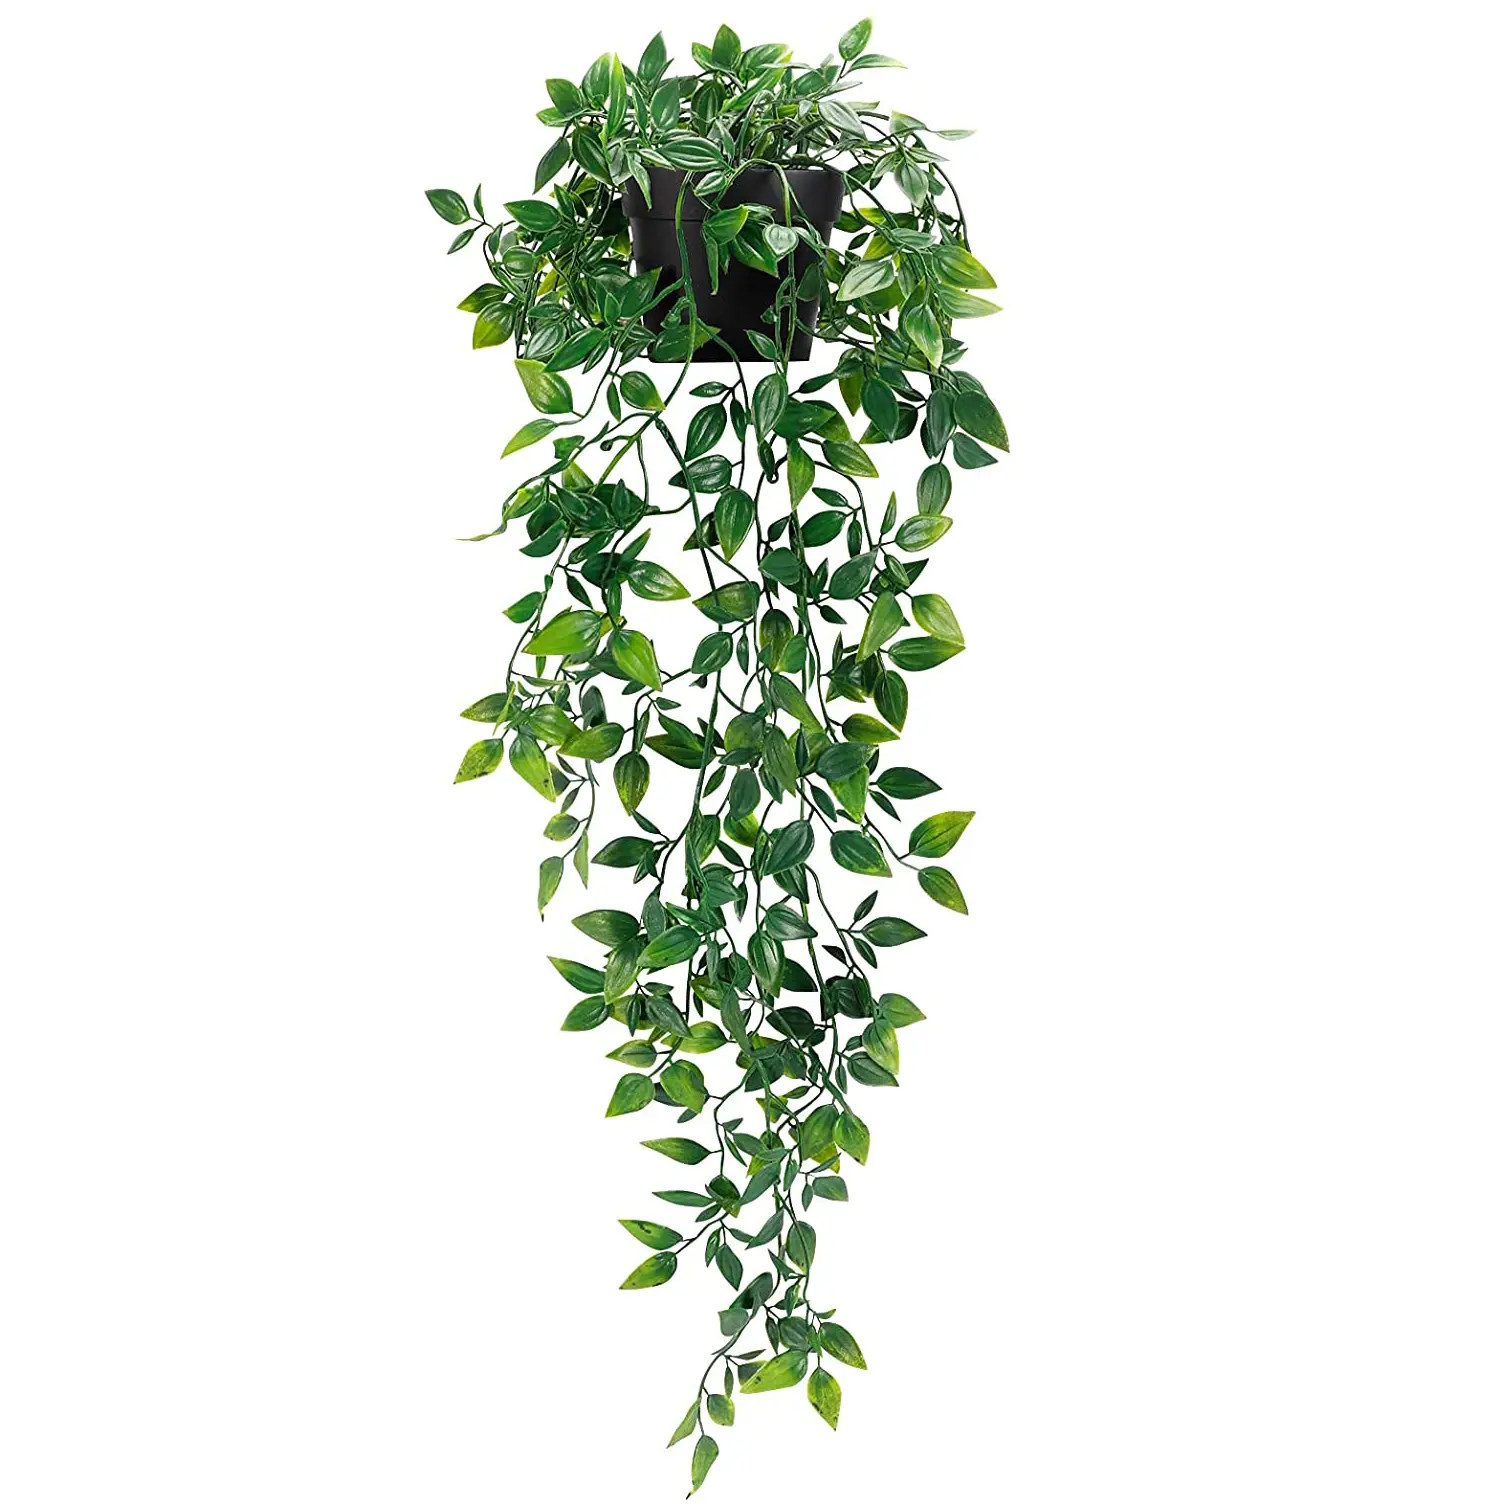 Artificial Hanging Plants Small Potted Plants for Indoor Outdoor Shelf Wall Decor garden landscaping vines artificial leaves